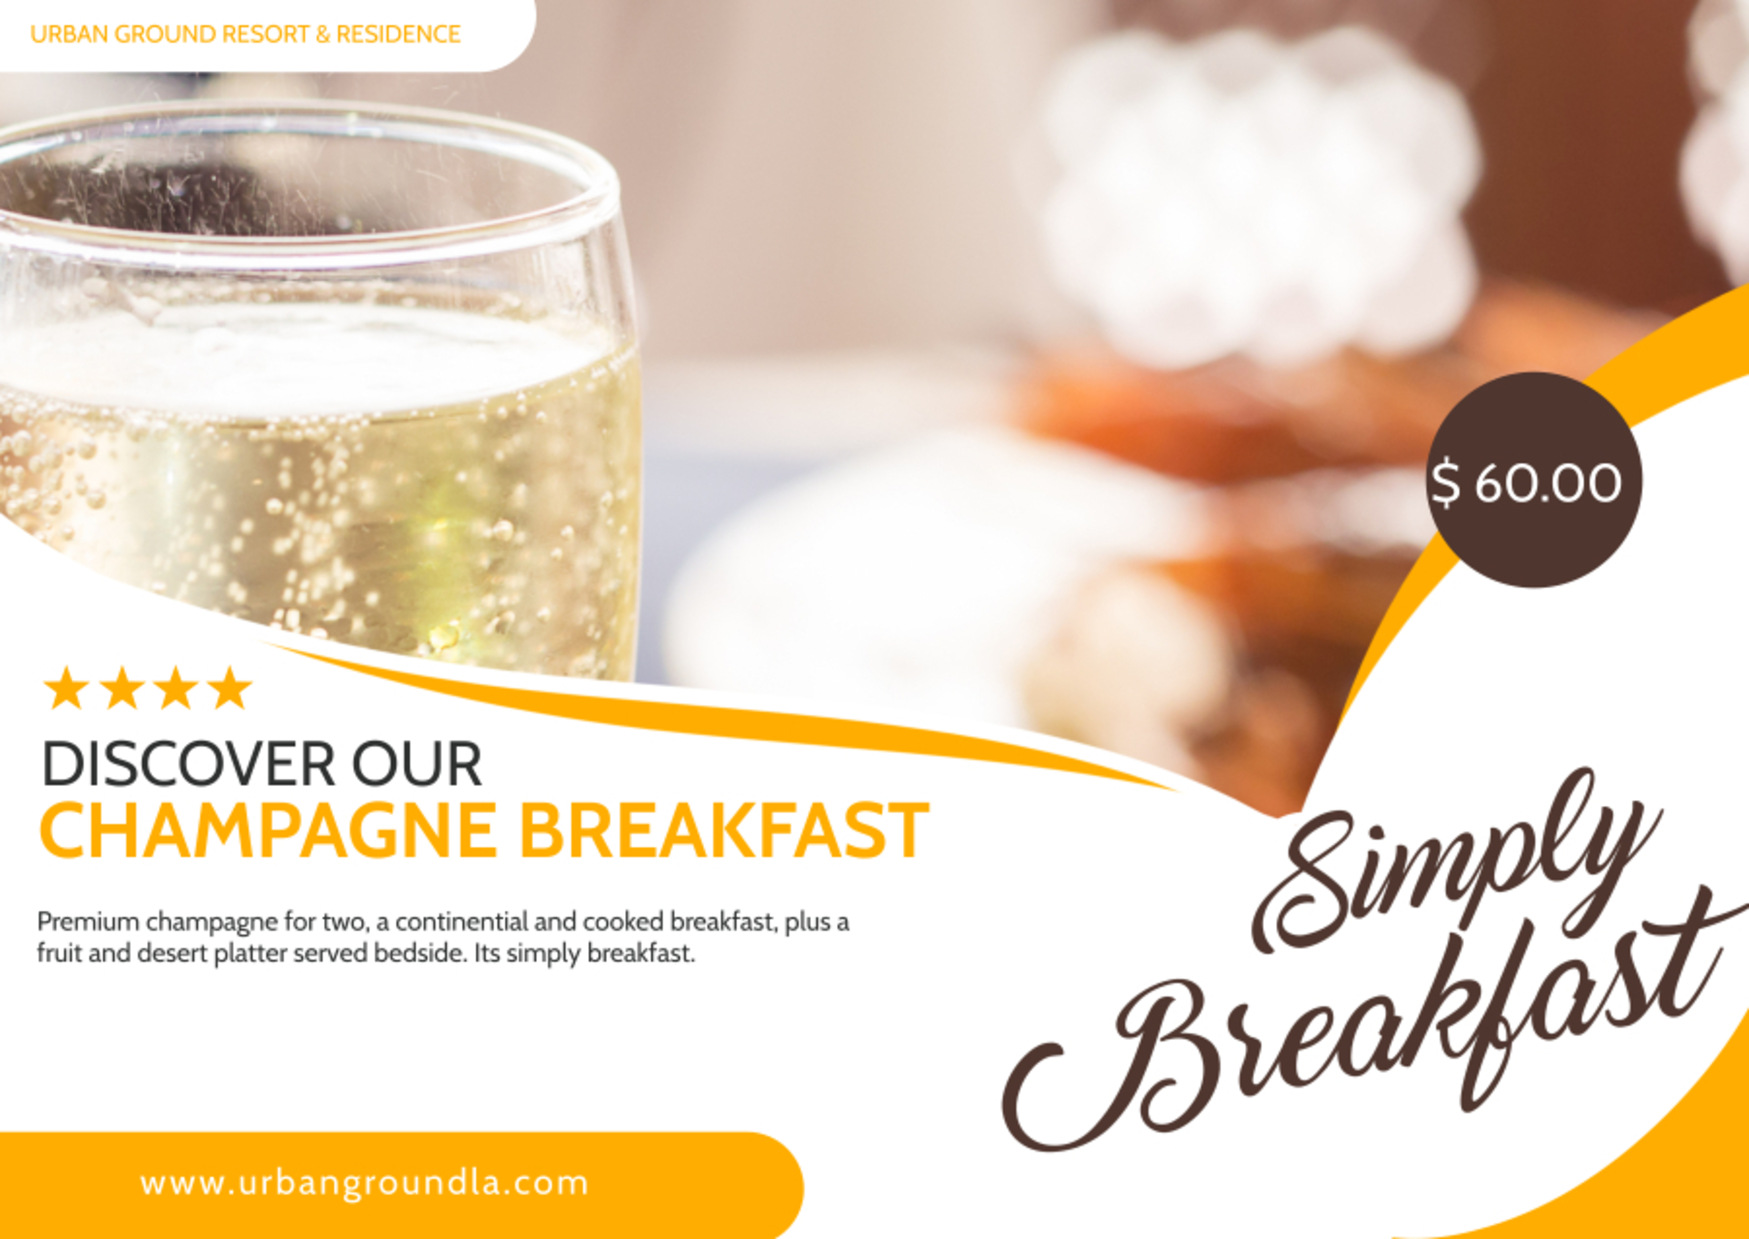 Discover Our Champgne Breakfast Urban Ground Resort & Residence